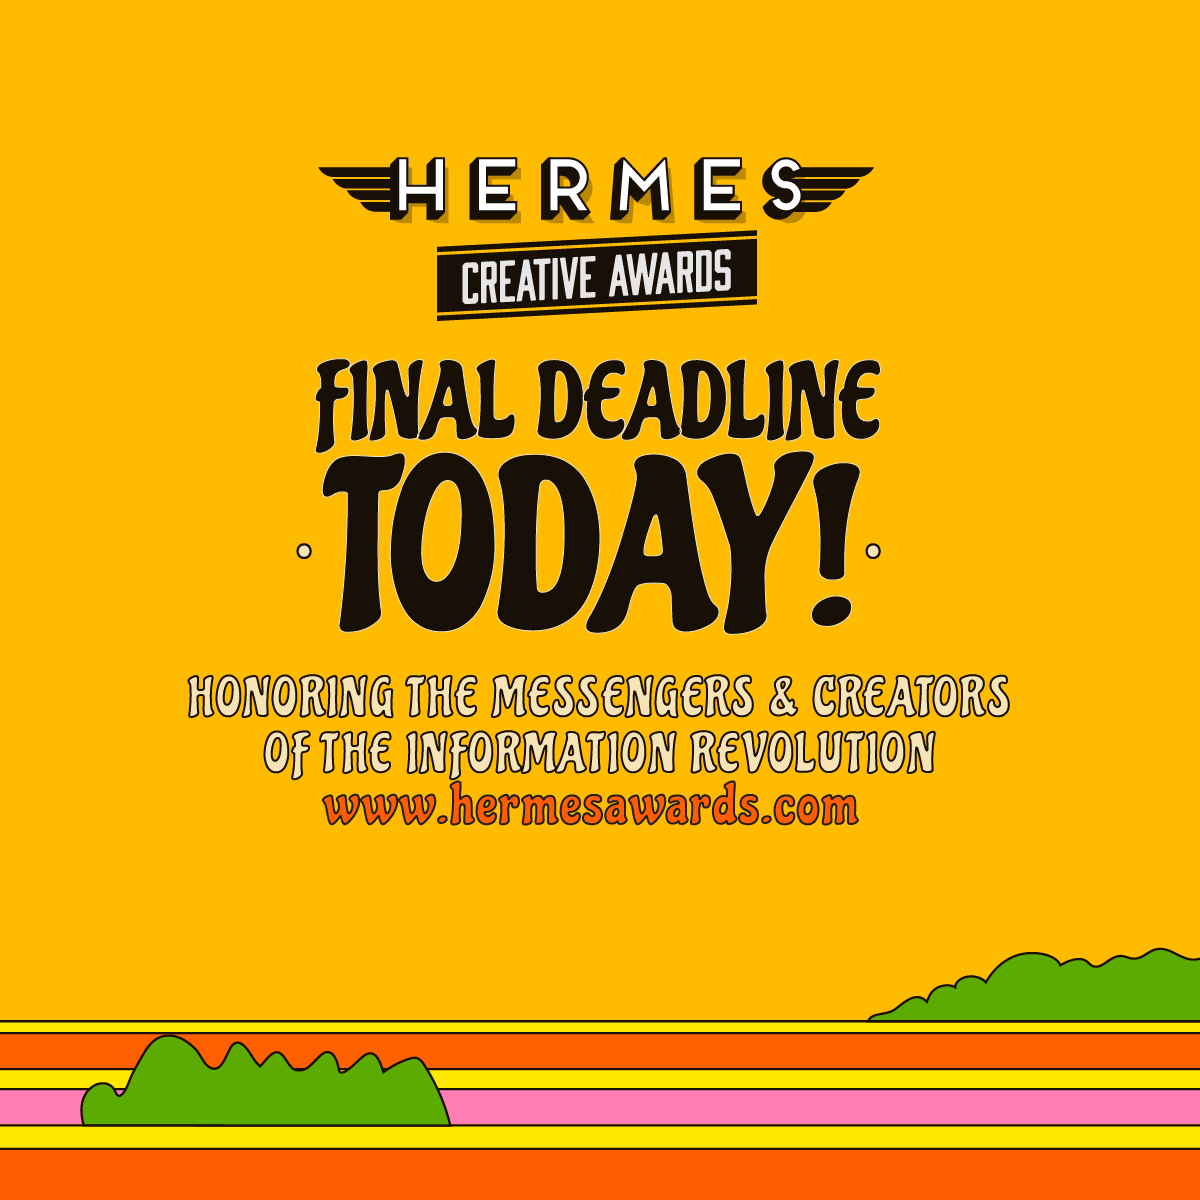 The Final Deadline Is TODAY! Submit your entries online at hermesawards.com or email the team for an extension info@hermesawards.com